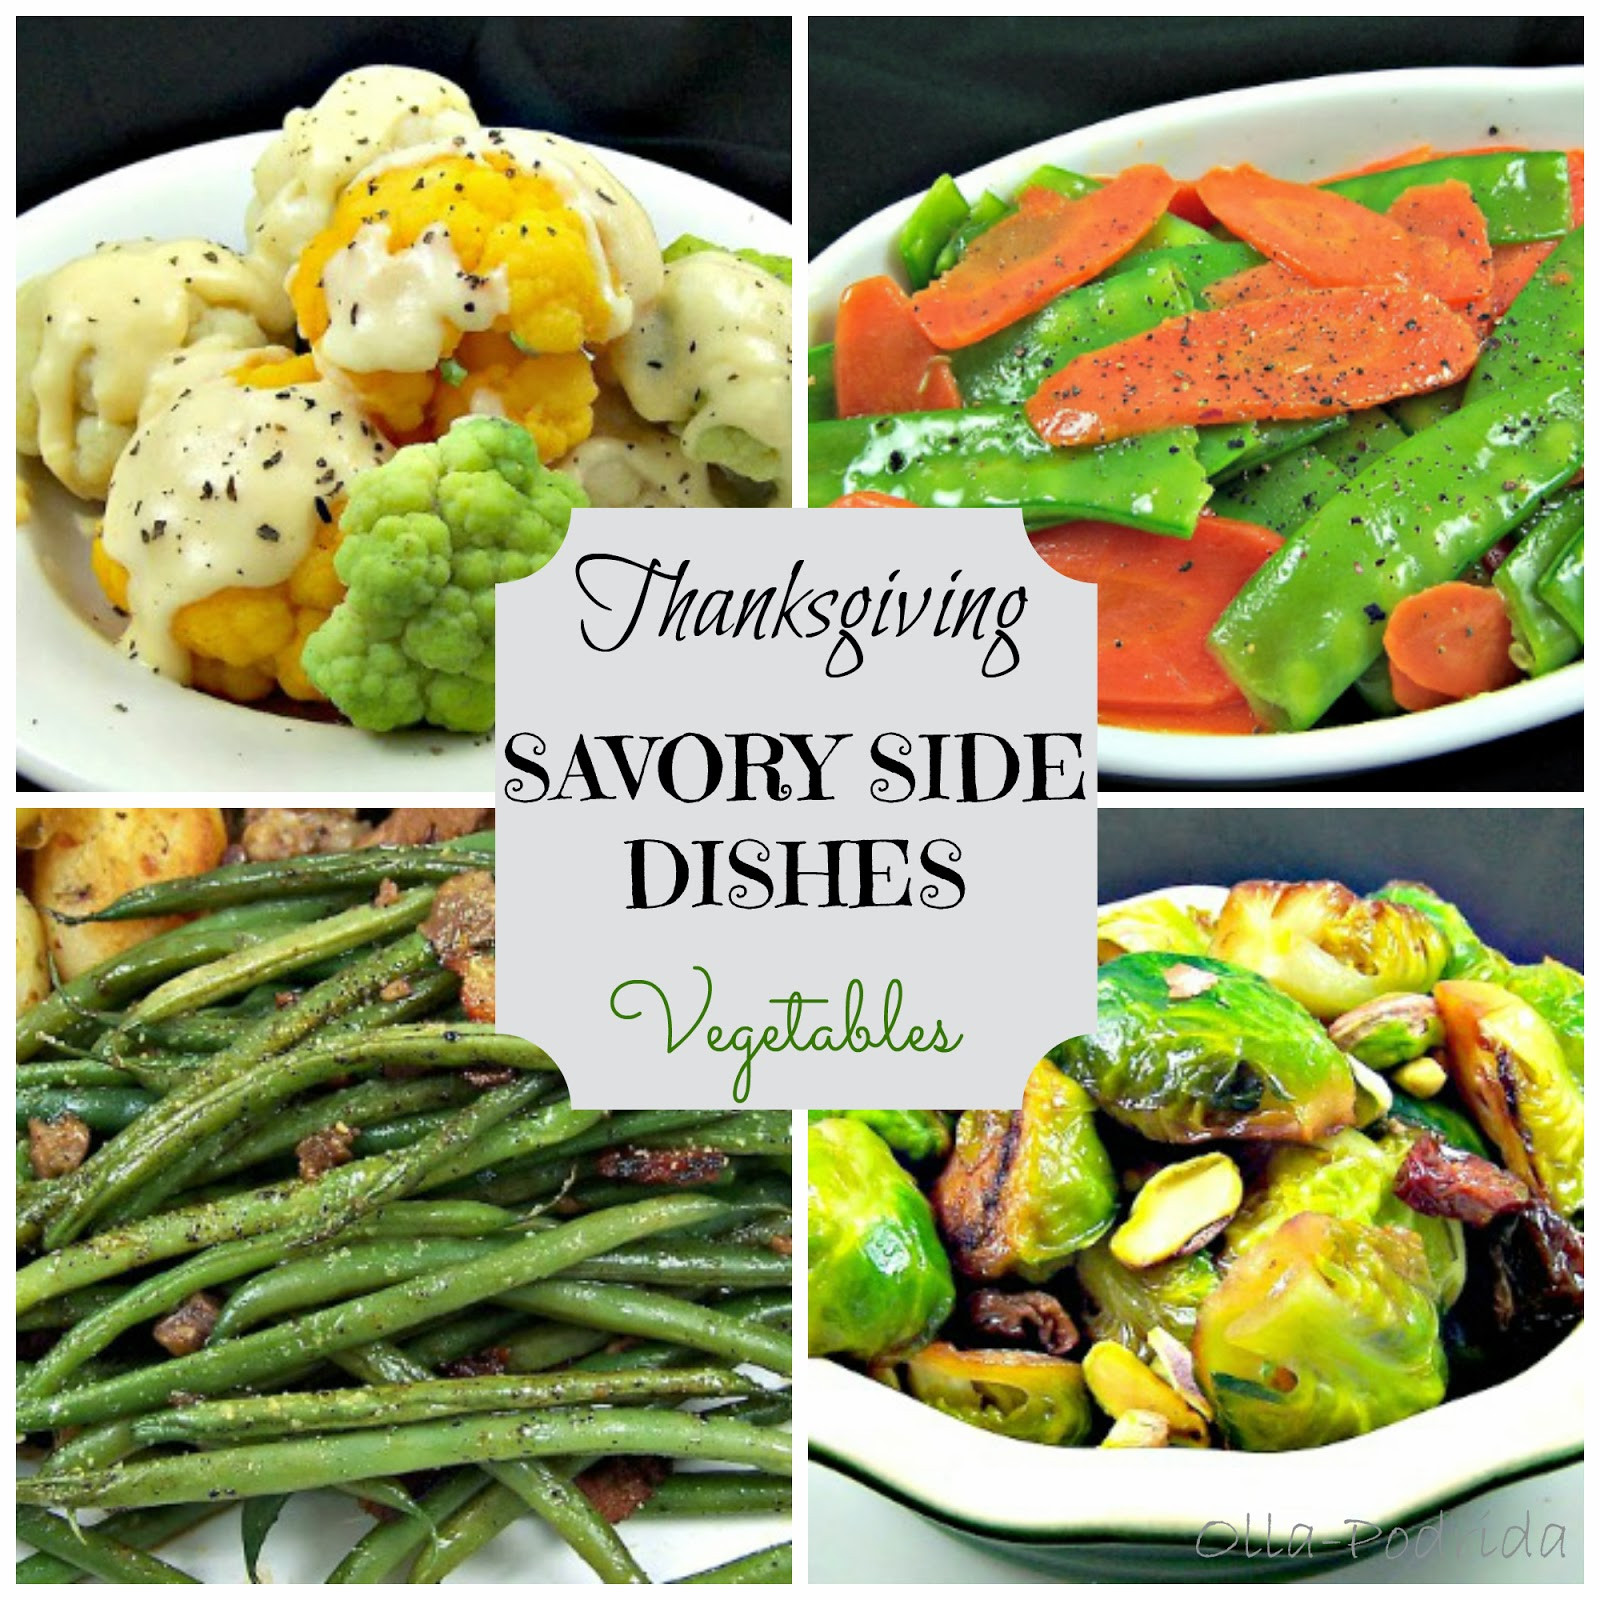 Vegetable Side Dishes For Thanksgiving
 Olla Podrida Thanksgiving Savory Side Dishes Ve ables